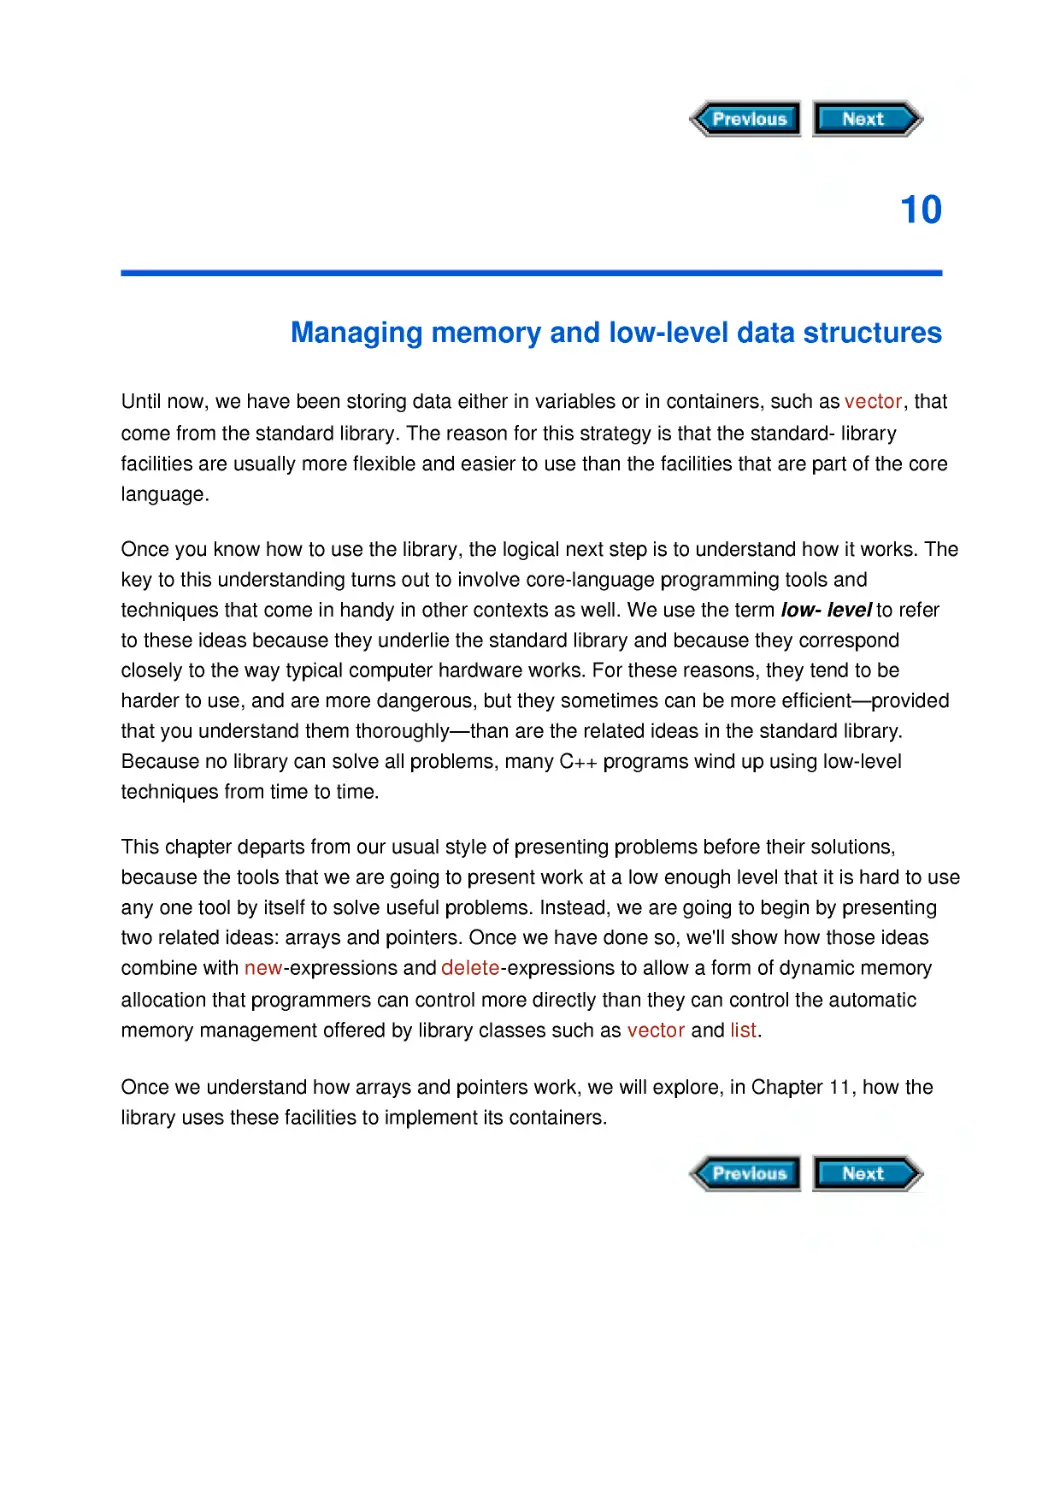 Chapter 10 Managing memory and low-level data structures